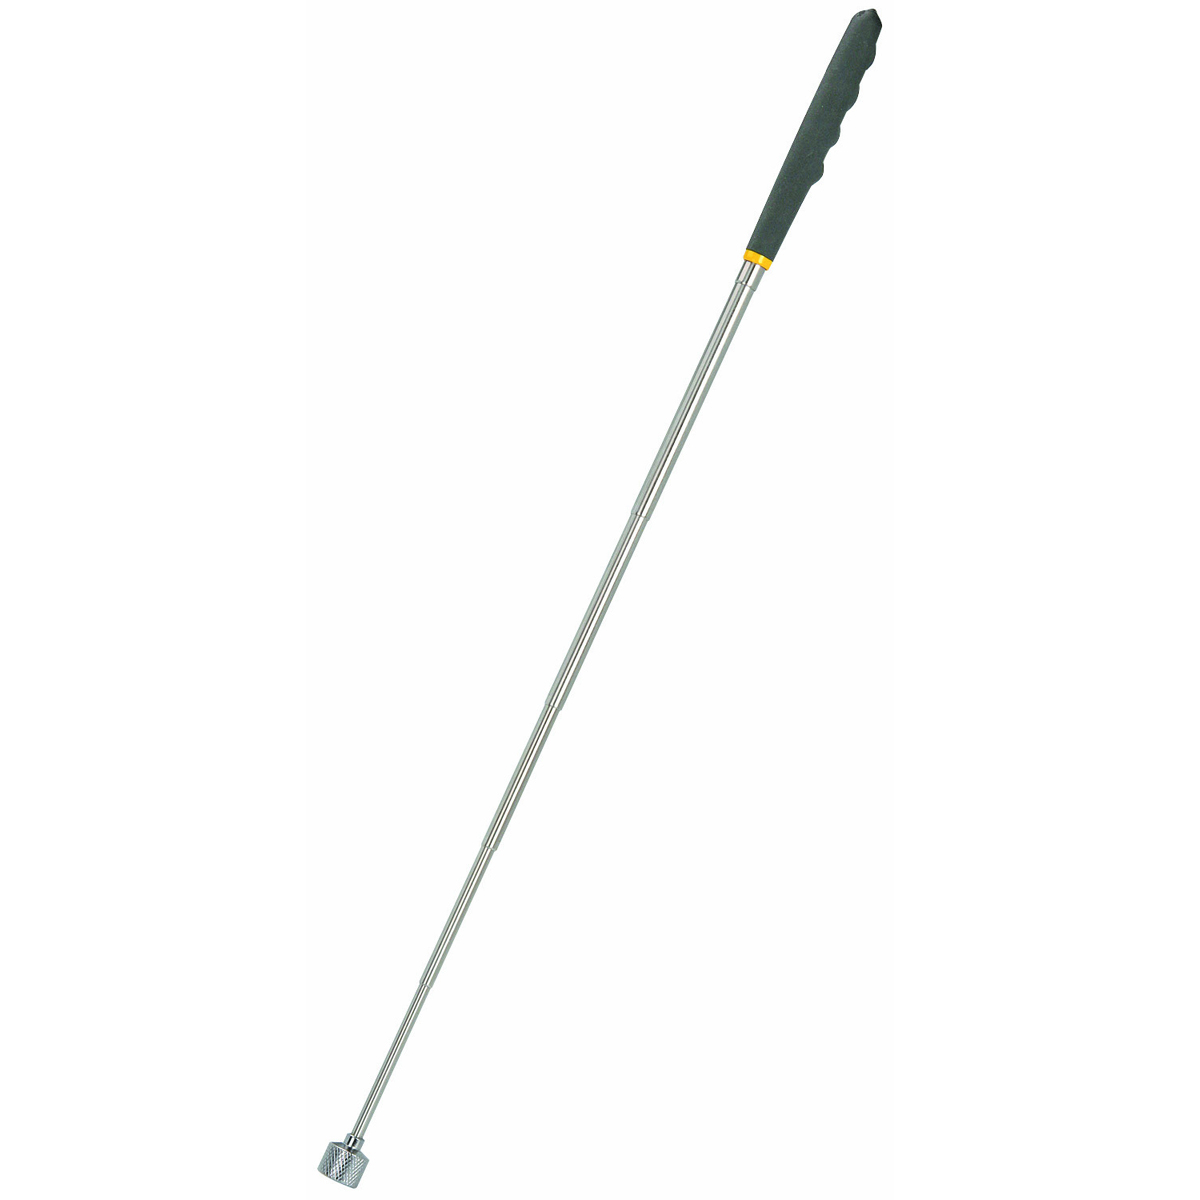 PITTSBURGH AUTOMOTIVE 15 Lbs. Capacity Telescoping Magnetic Pickup Tool - Item 95933